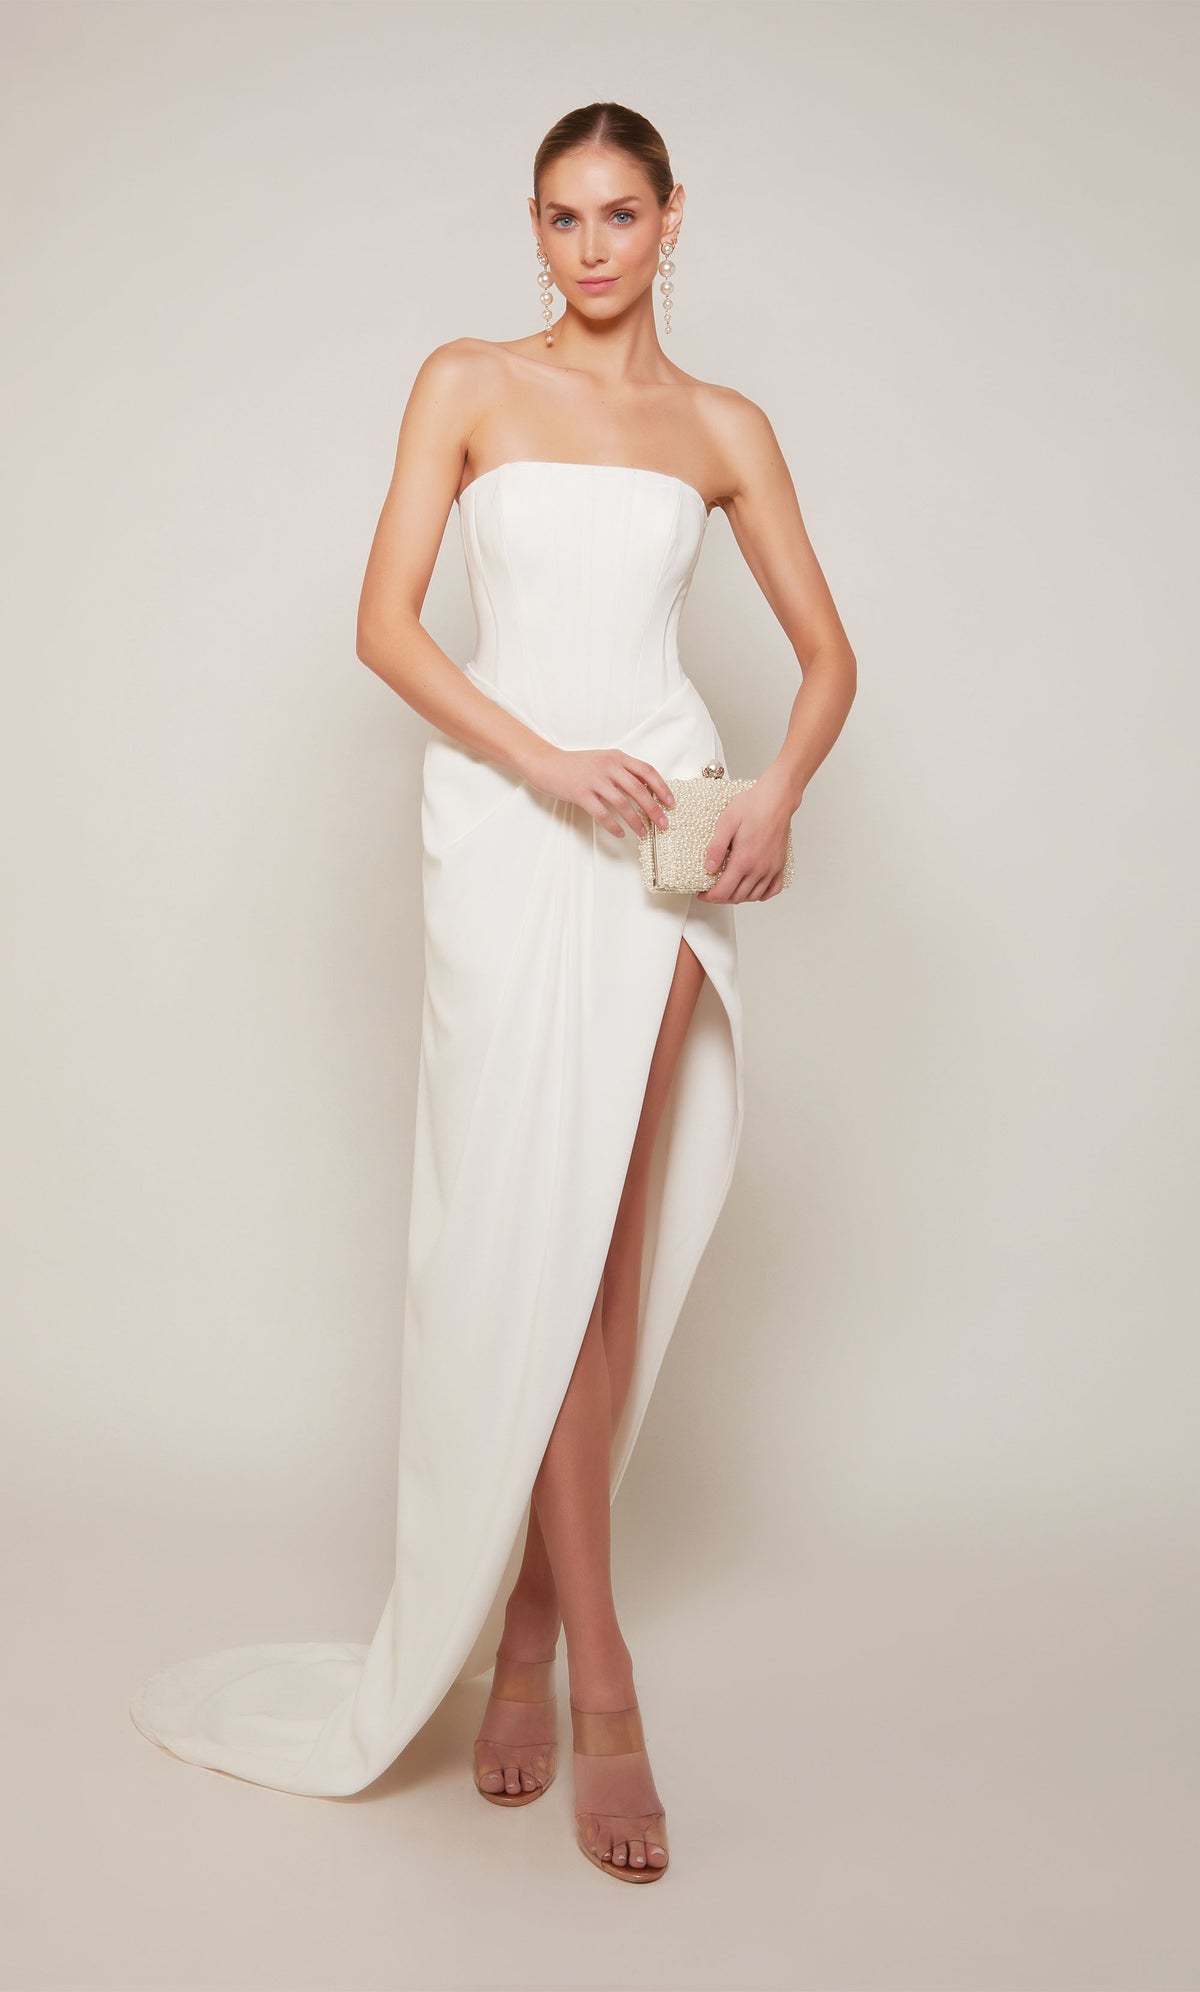 A modern corset gown with an asymmetrical hemline and slight train in ivory.